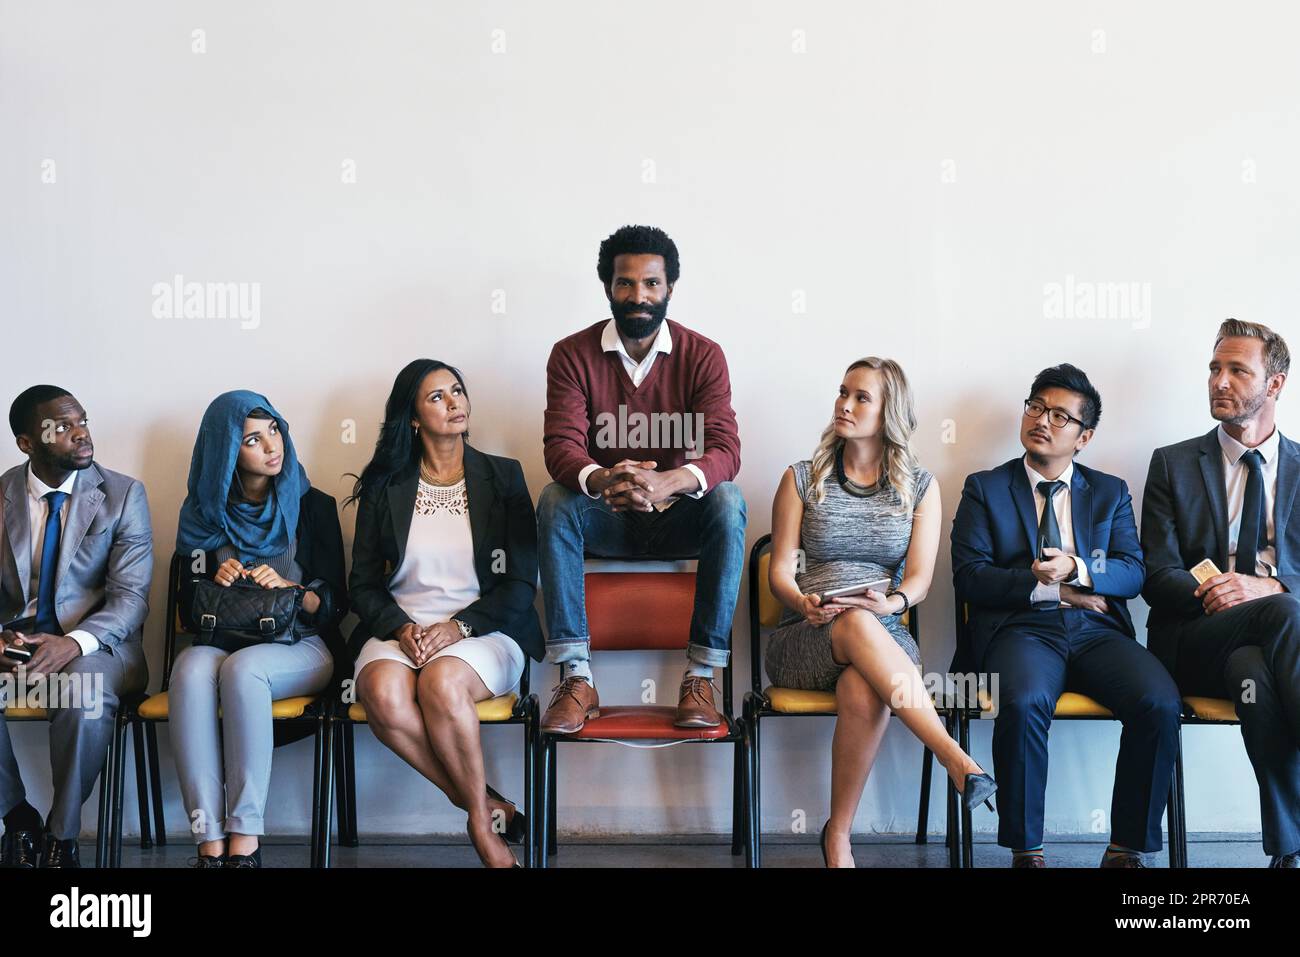 He is certain he will make the cut. Shot of a group of confident businesspeople waiting in line for their interviews while a man sits on top of a chair inside of a office during the day. Stock Photo